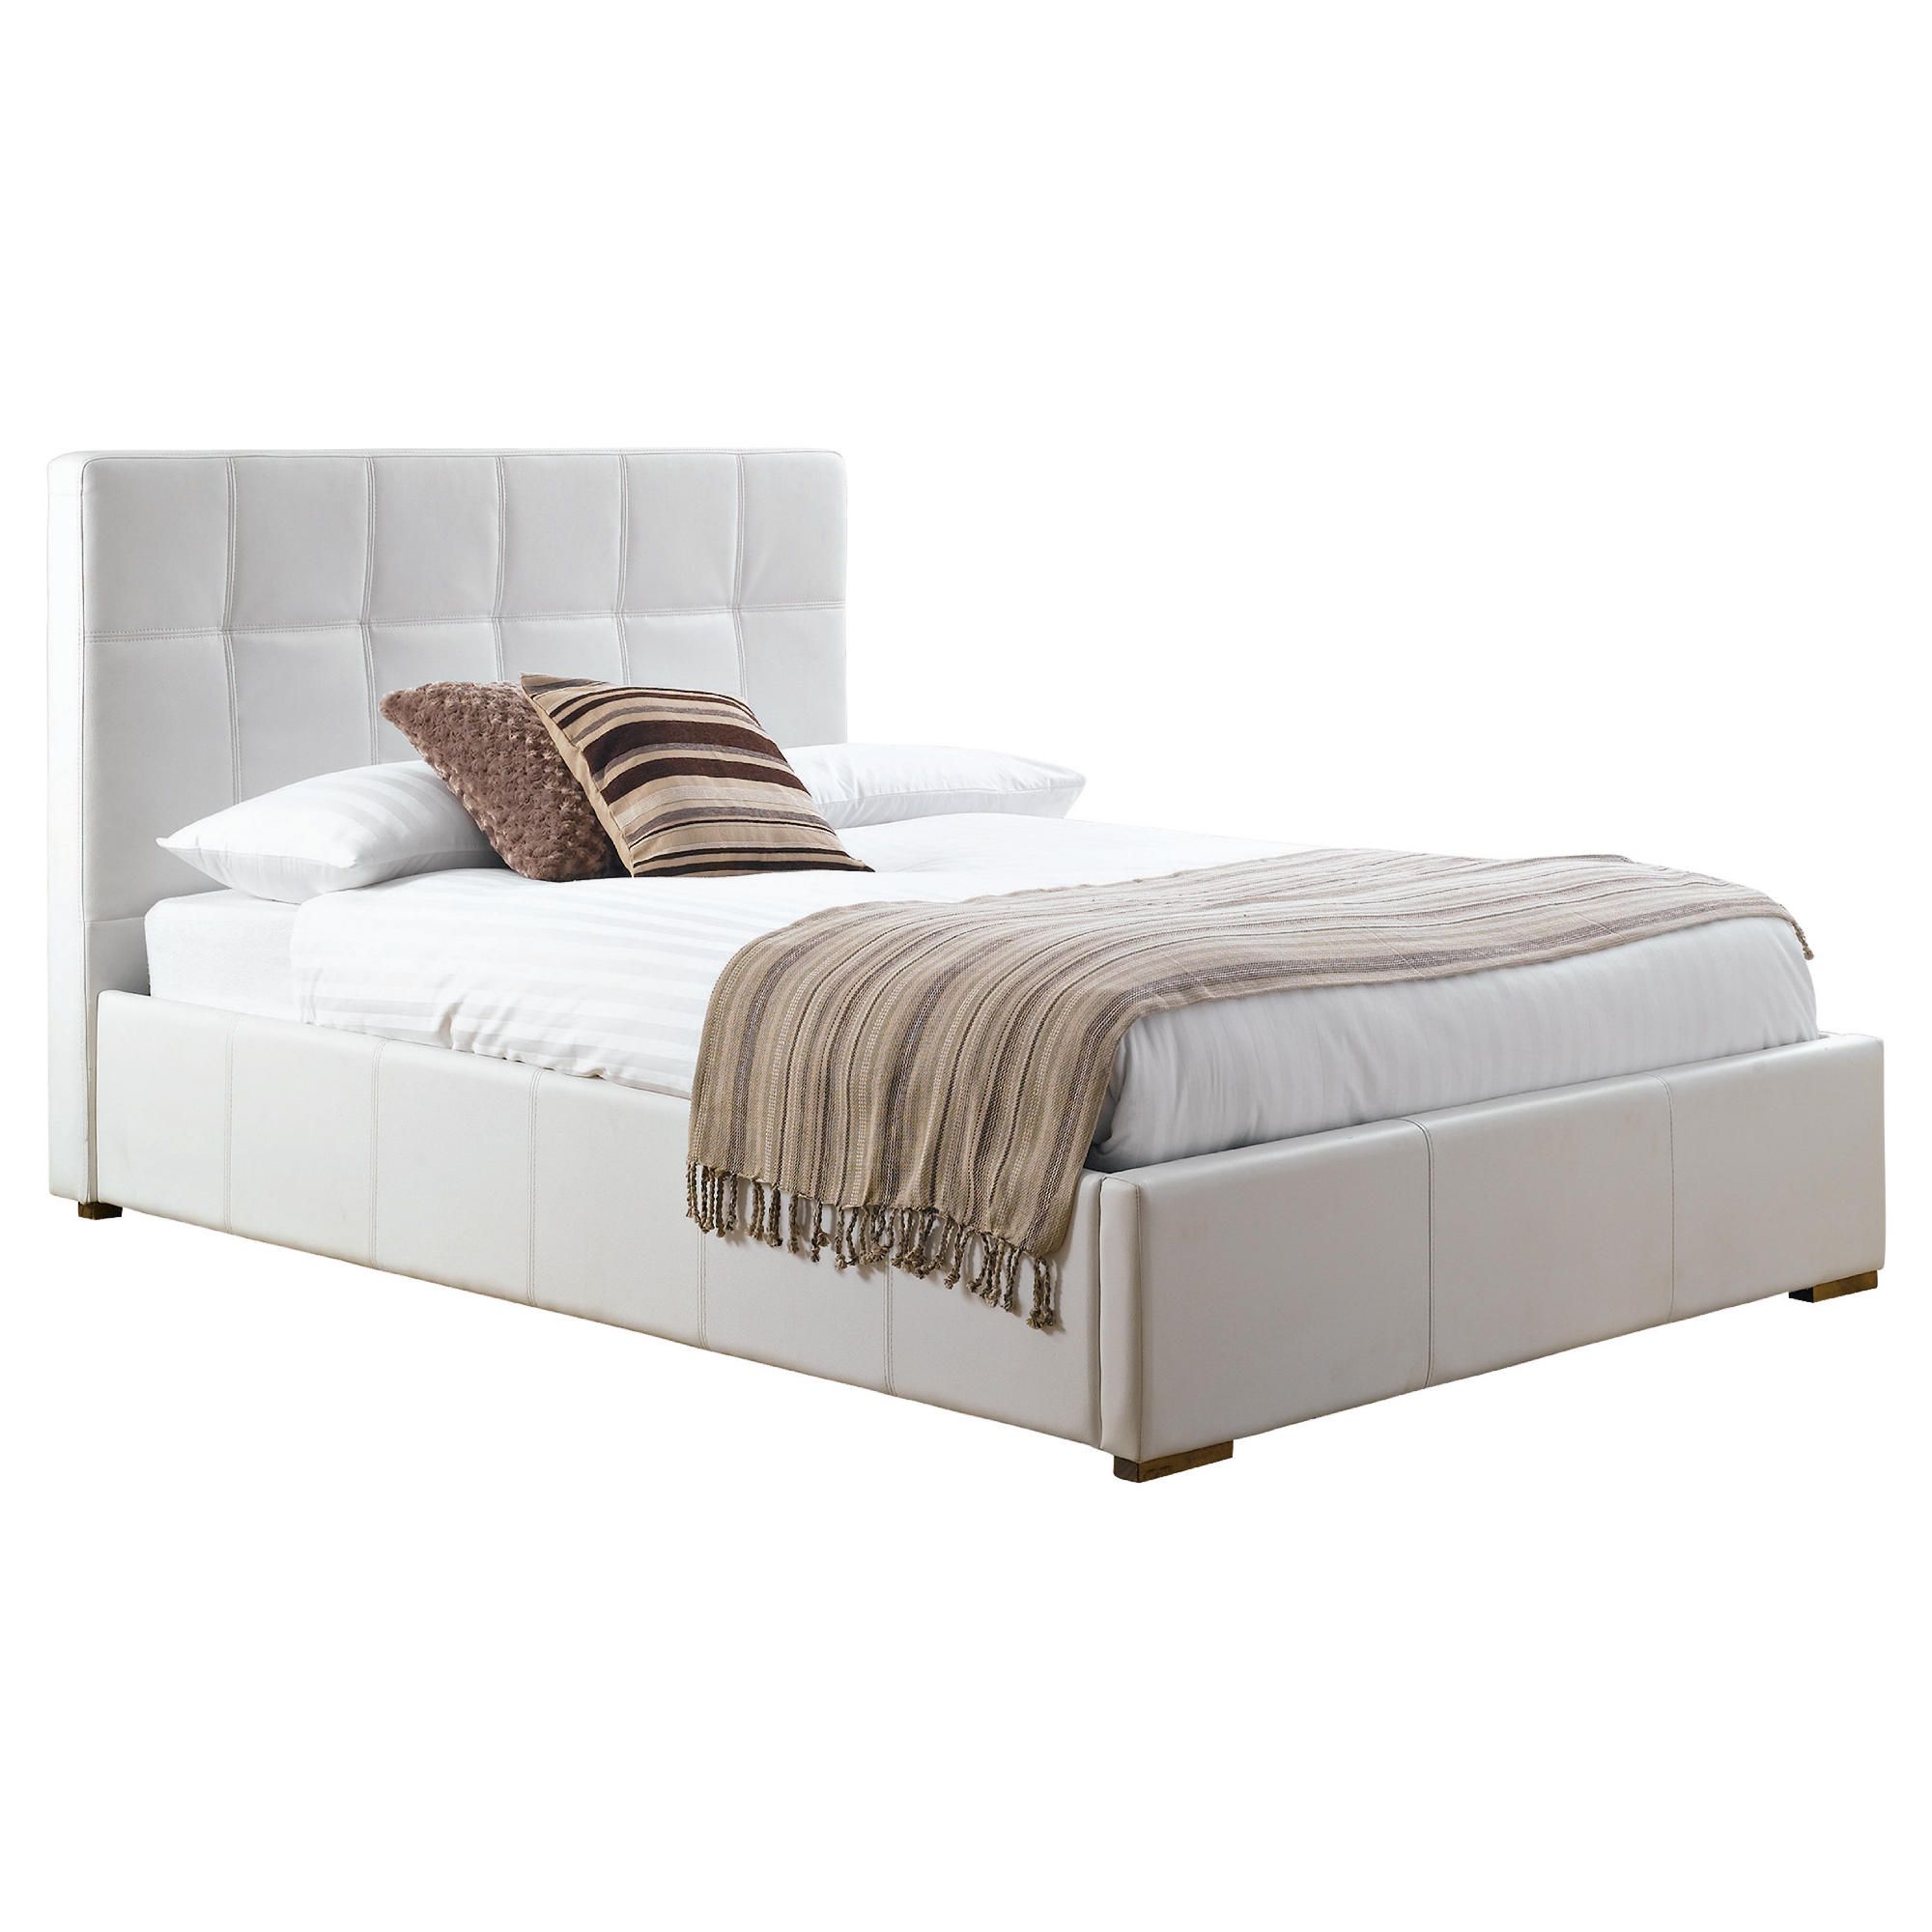 Orleans Double Faux Leather Storage Bed, White at Tescos Direct